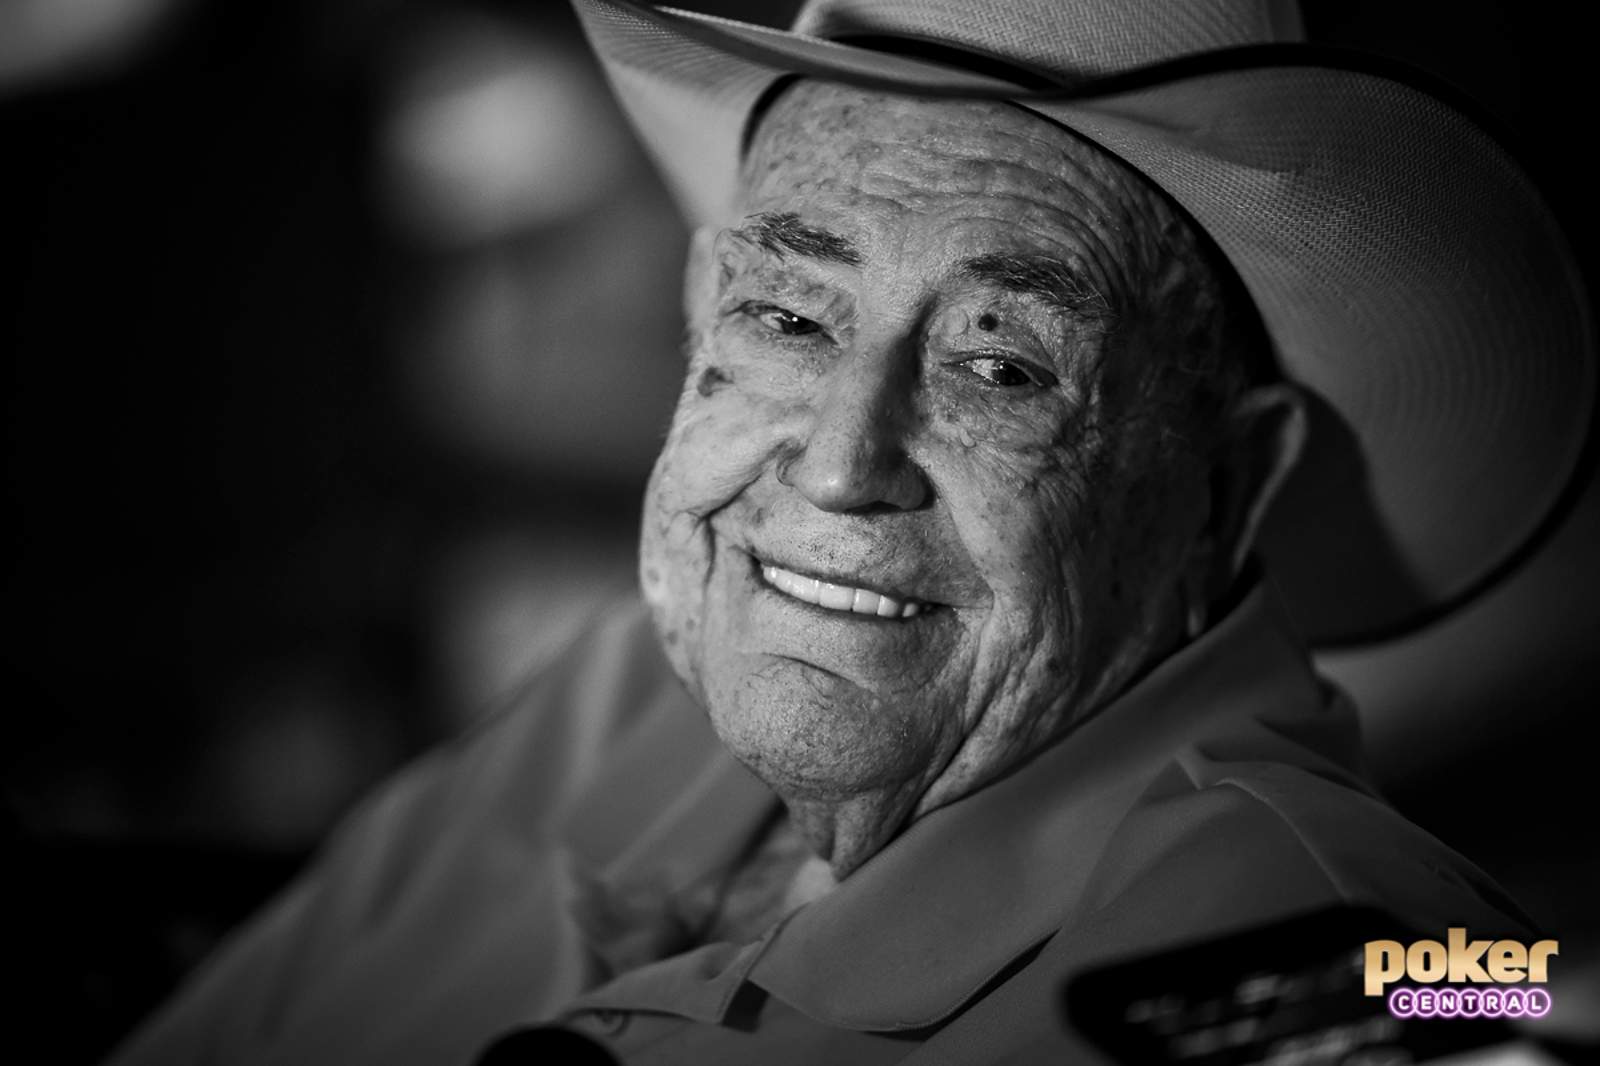 Nothing But Praise For Doyle Brunson as He Eyes His 11th Bracelet